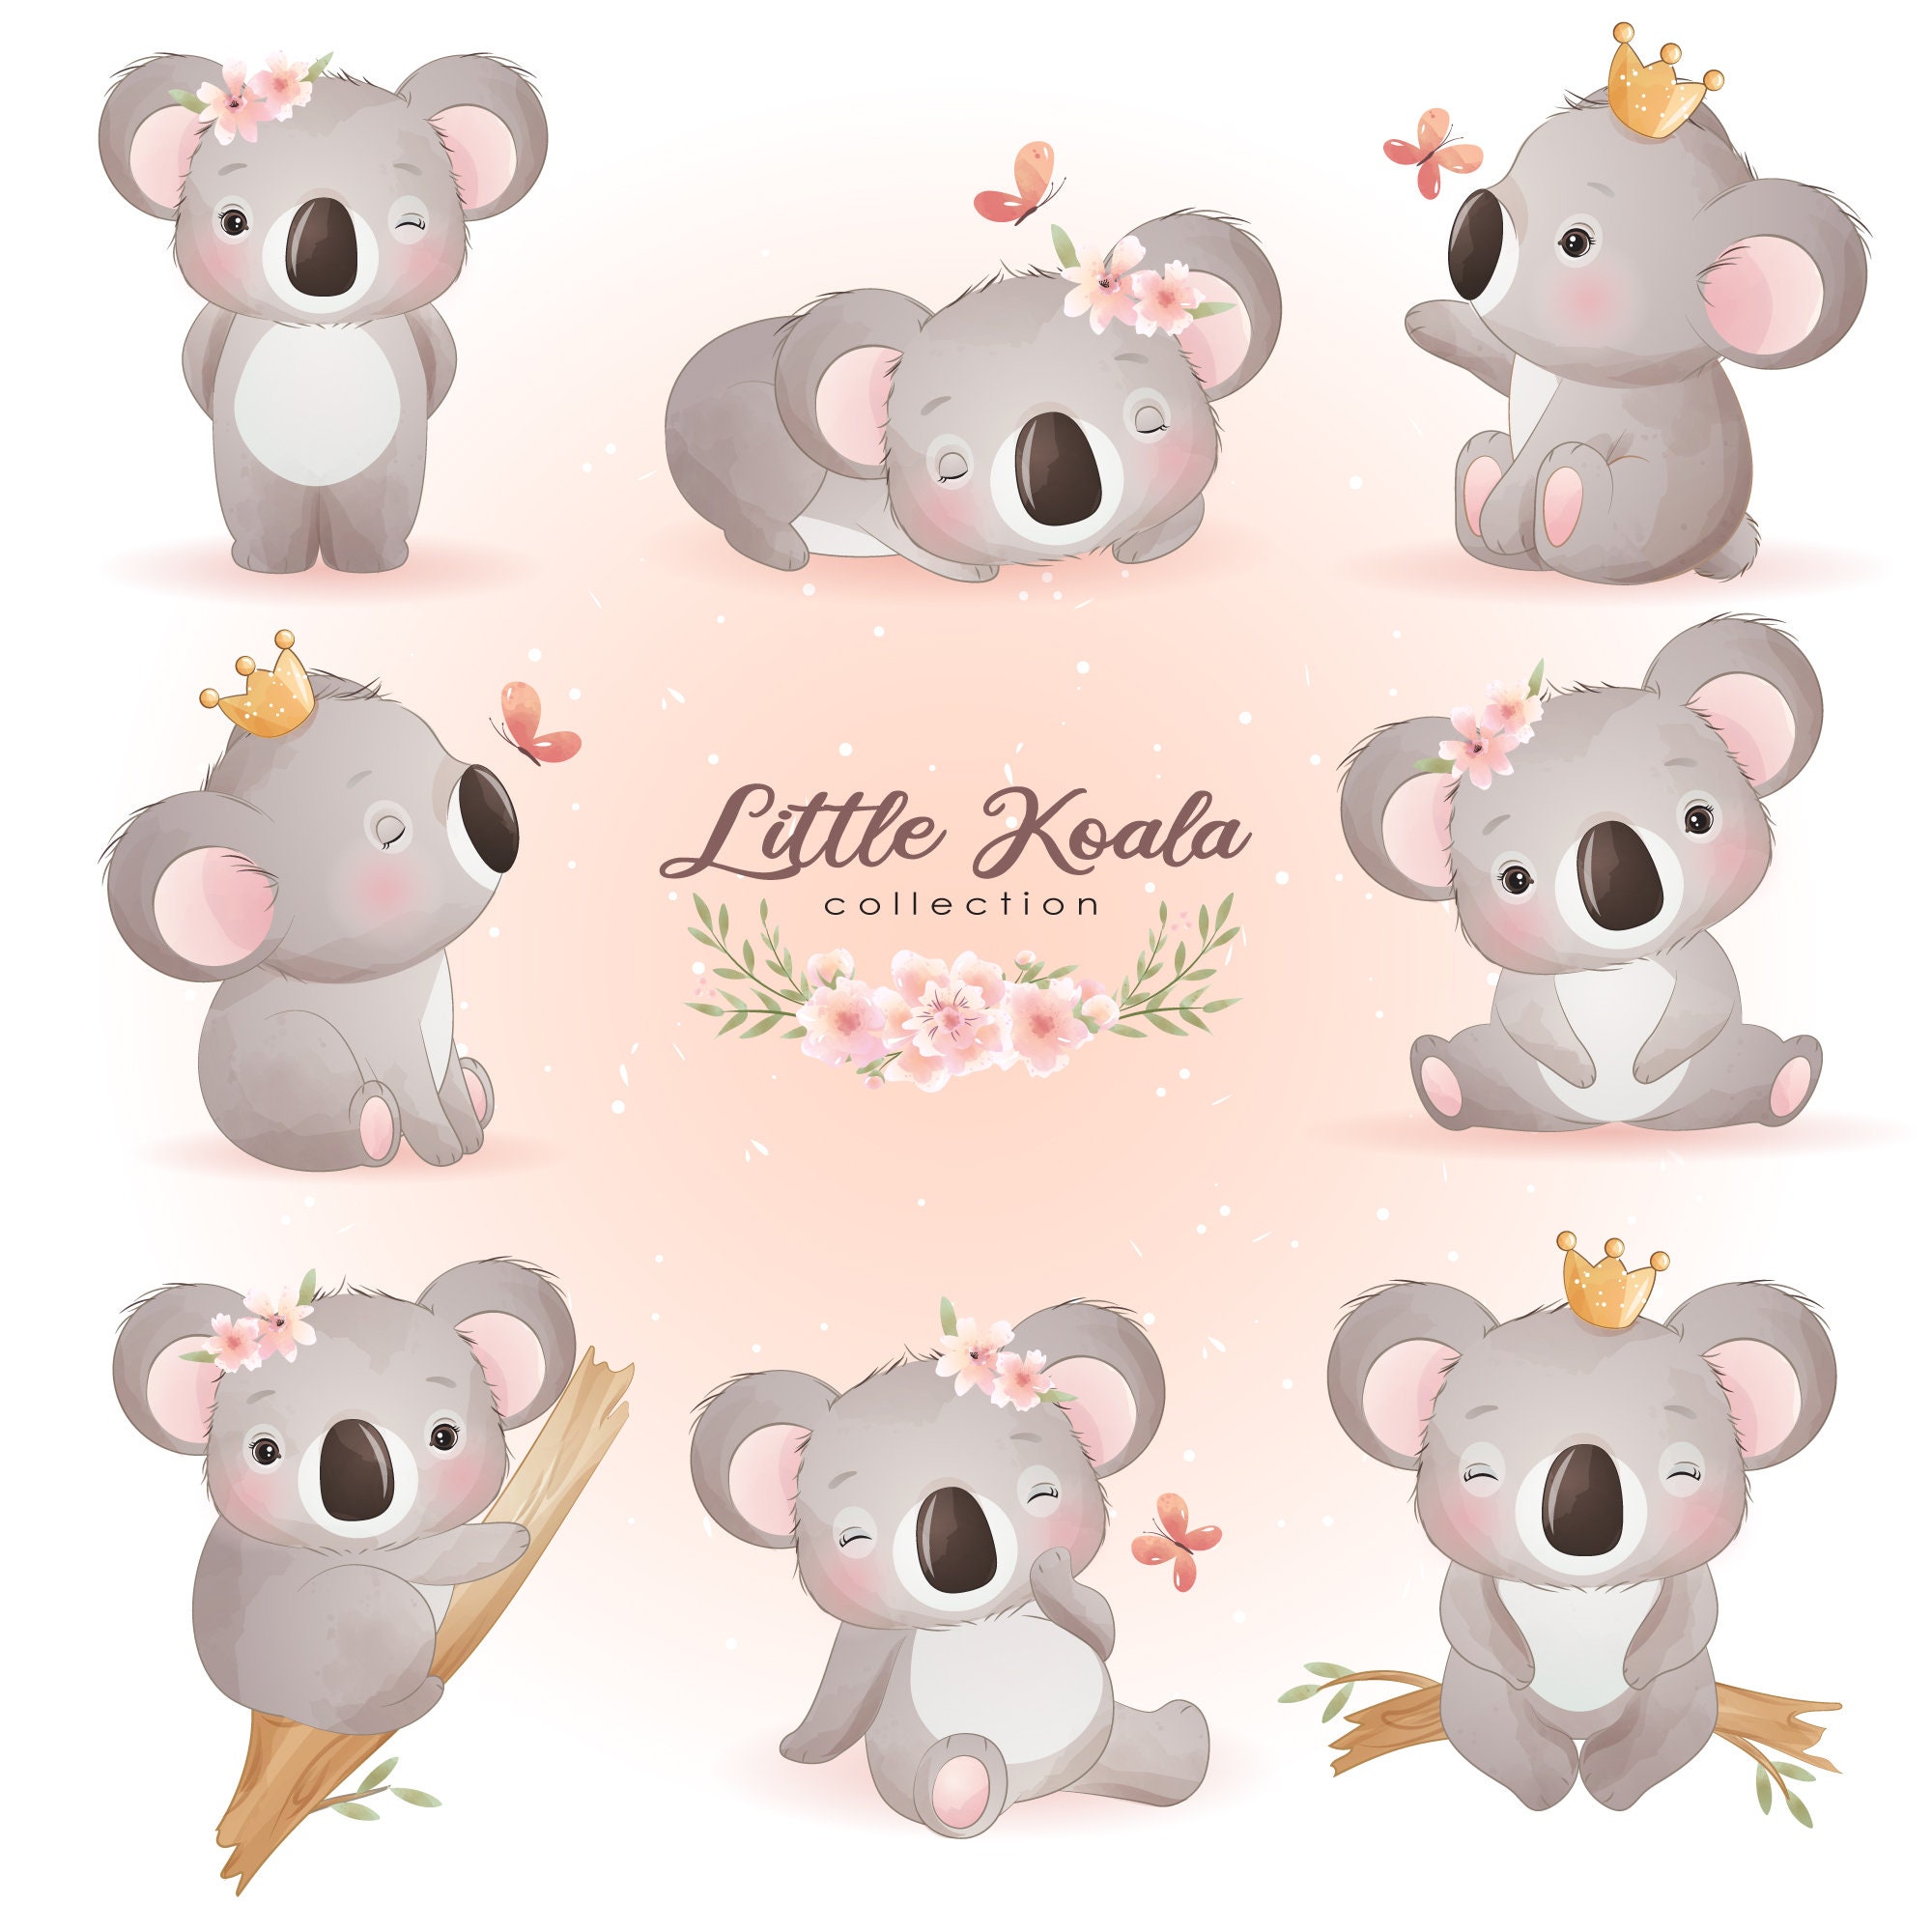 Cute Little koala poses clipart with watercolor illustration Etsy 日本